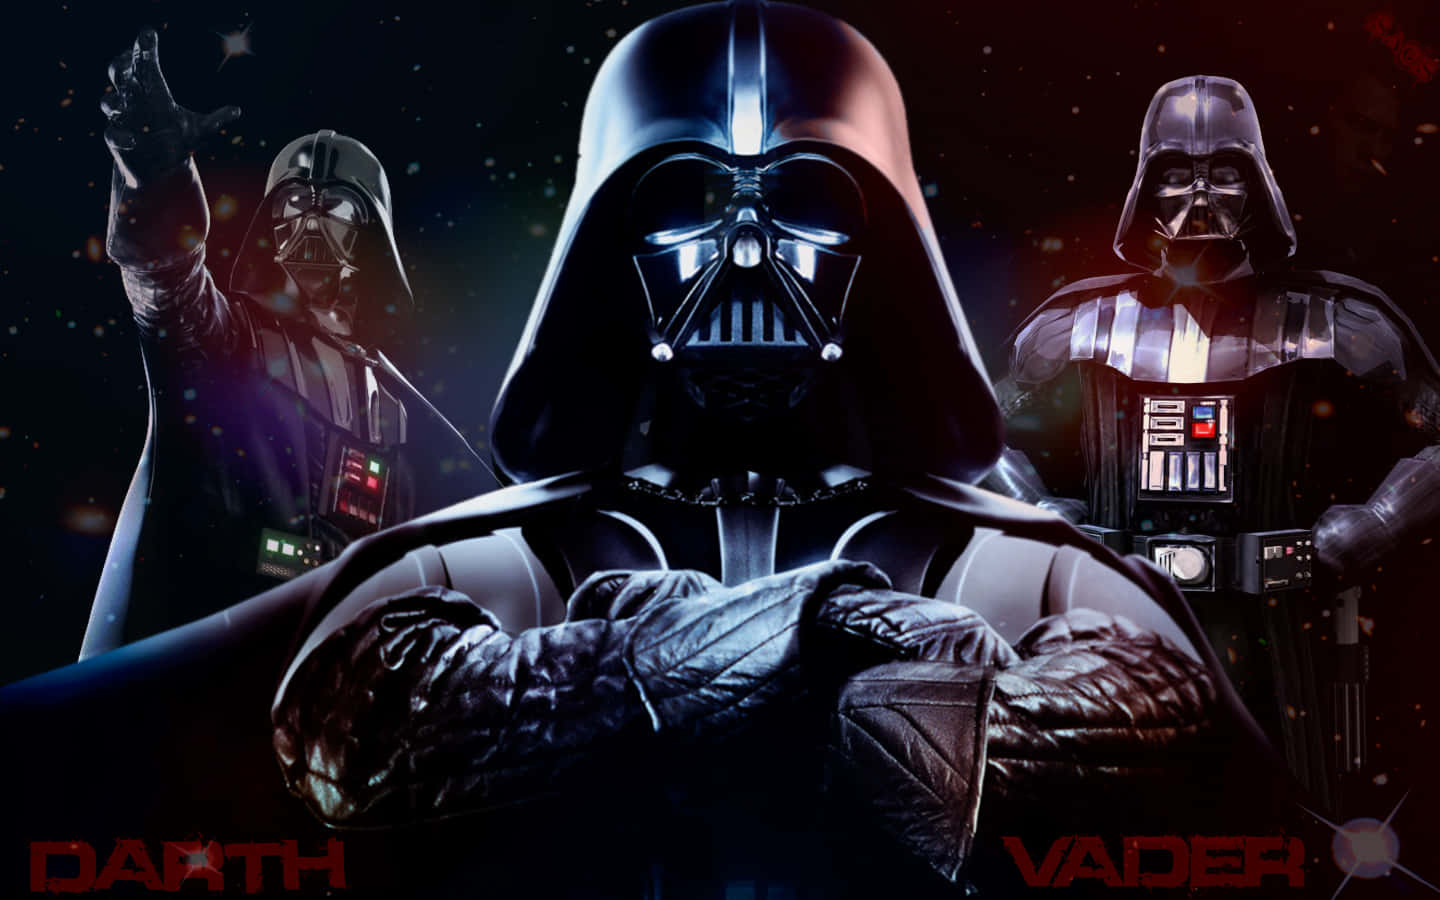 Darth Vader, the enigmatic villain from Star Wars